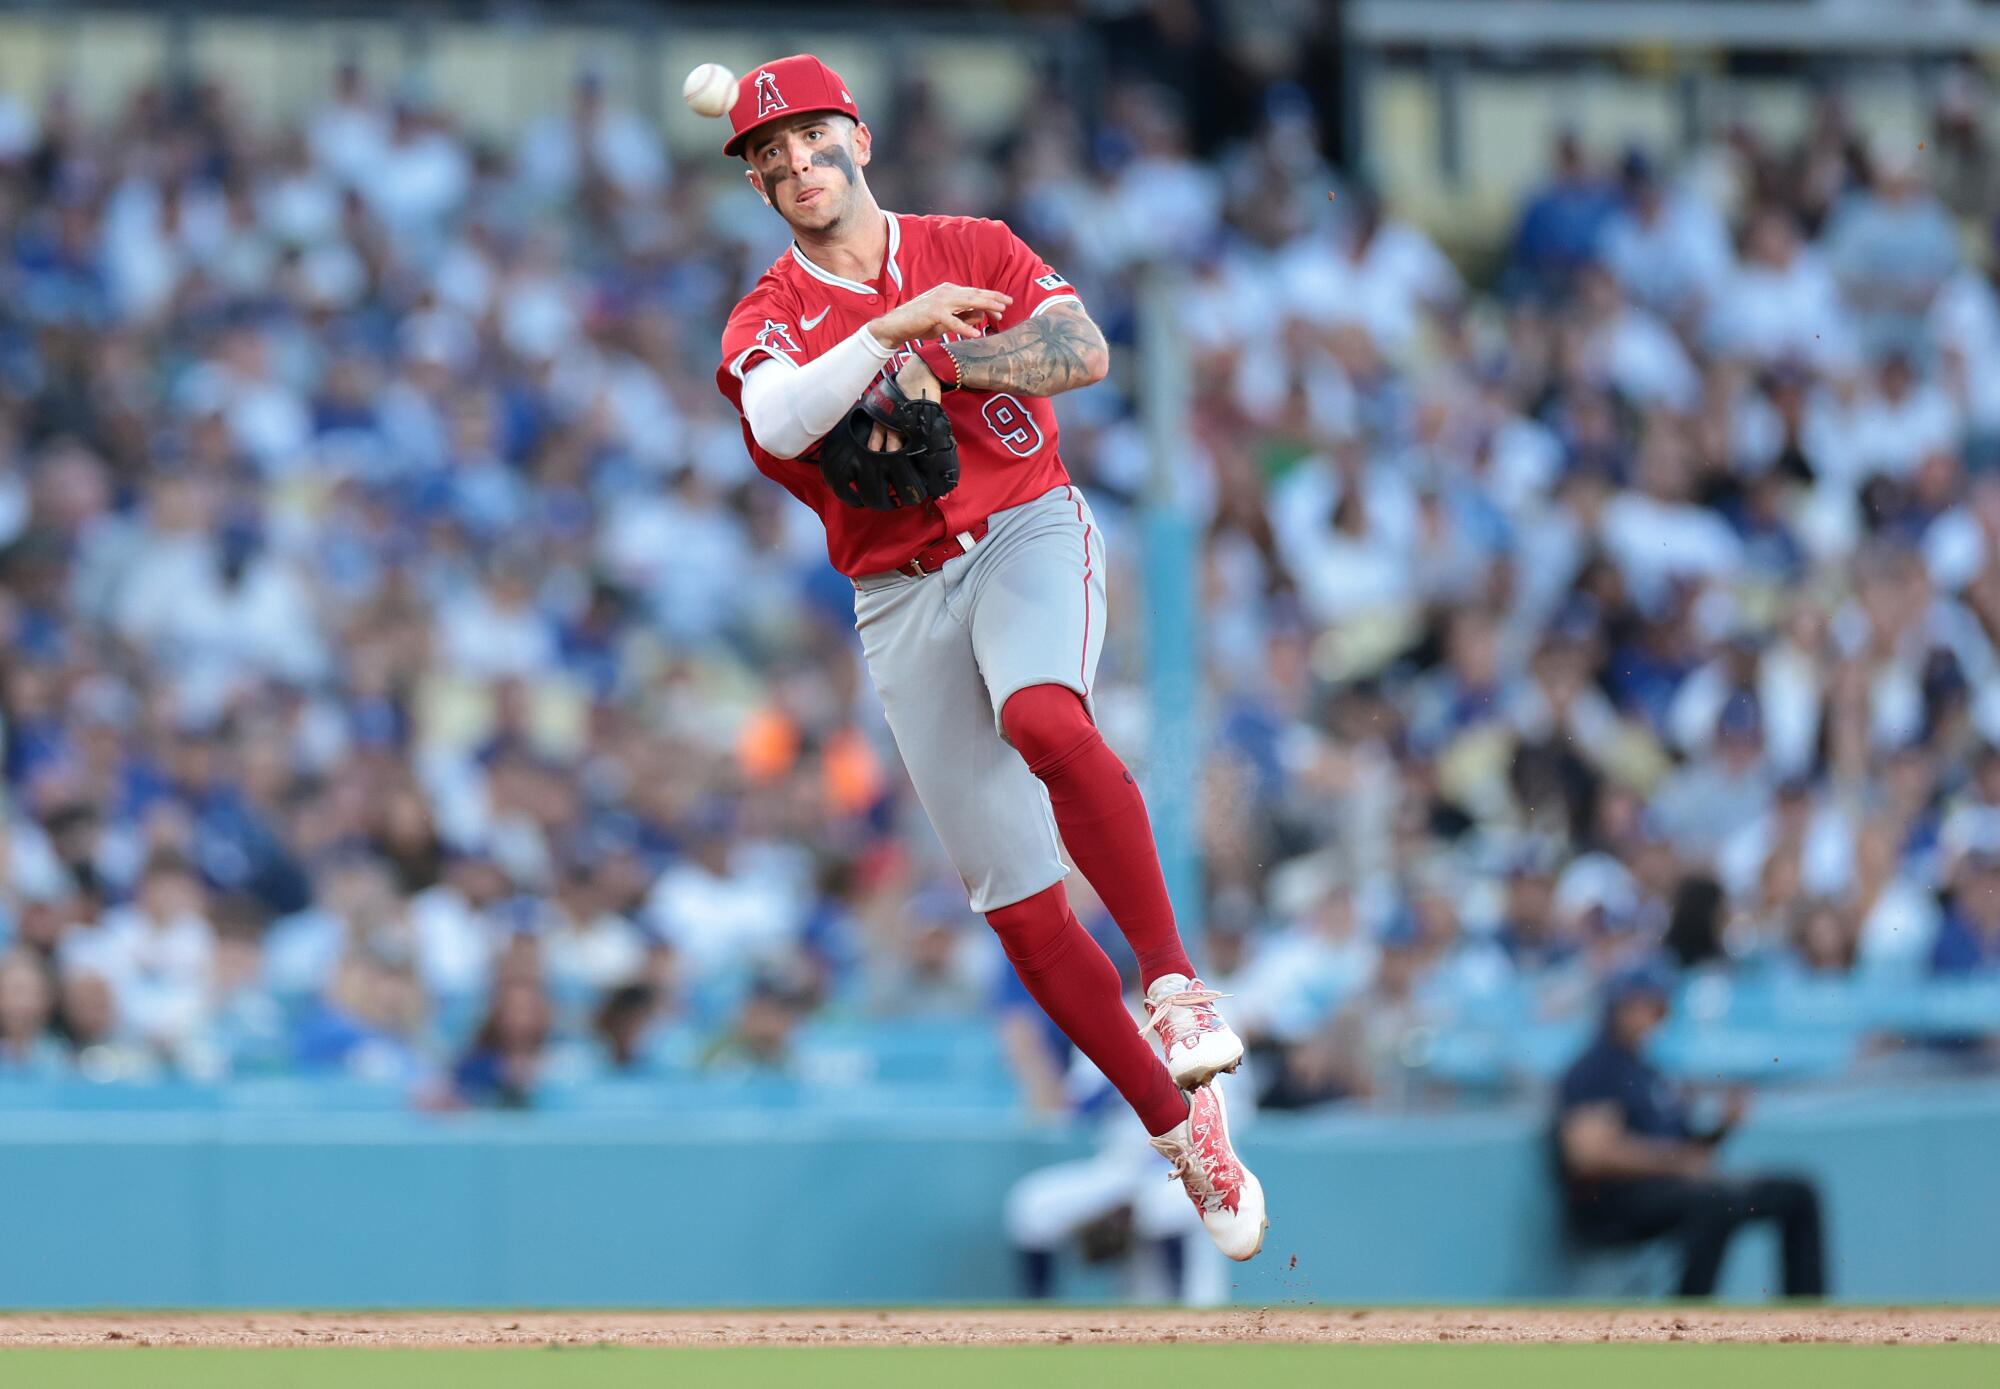 Angels shortstop Zach Neto throws to first base against the Dodgers on Friday.